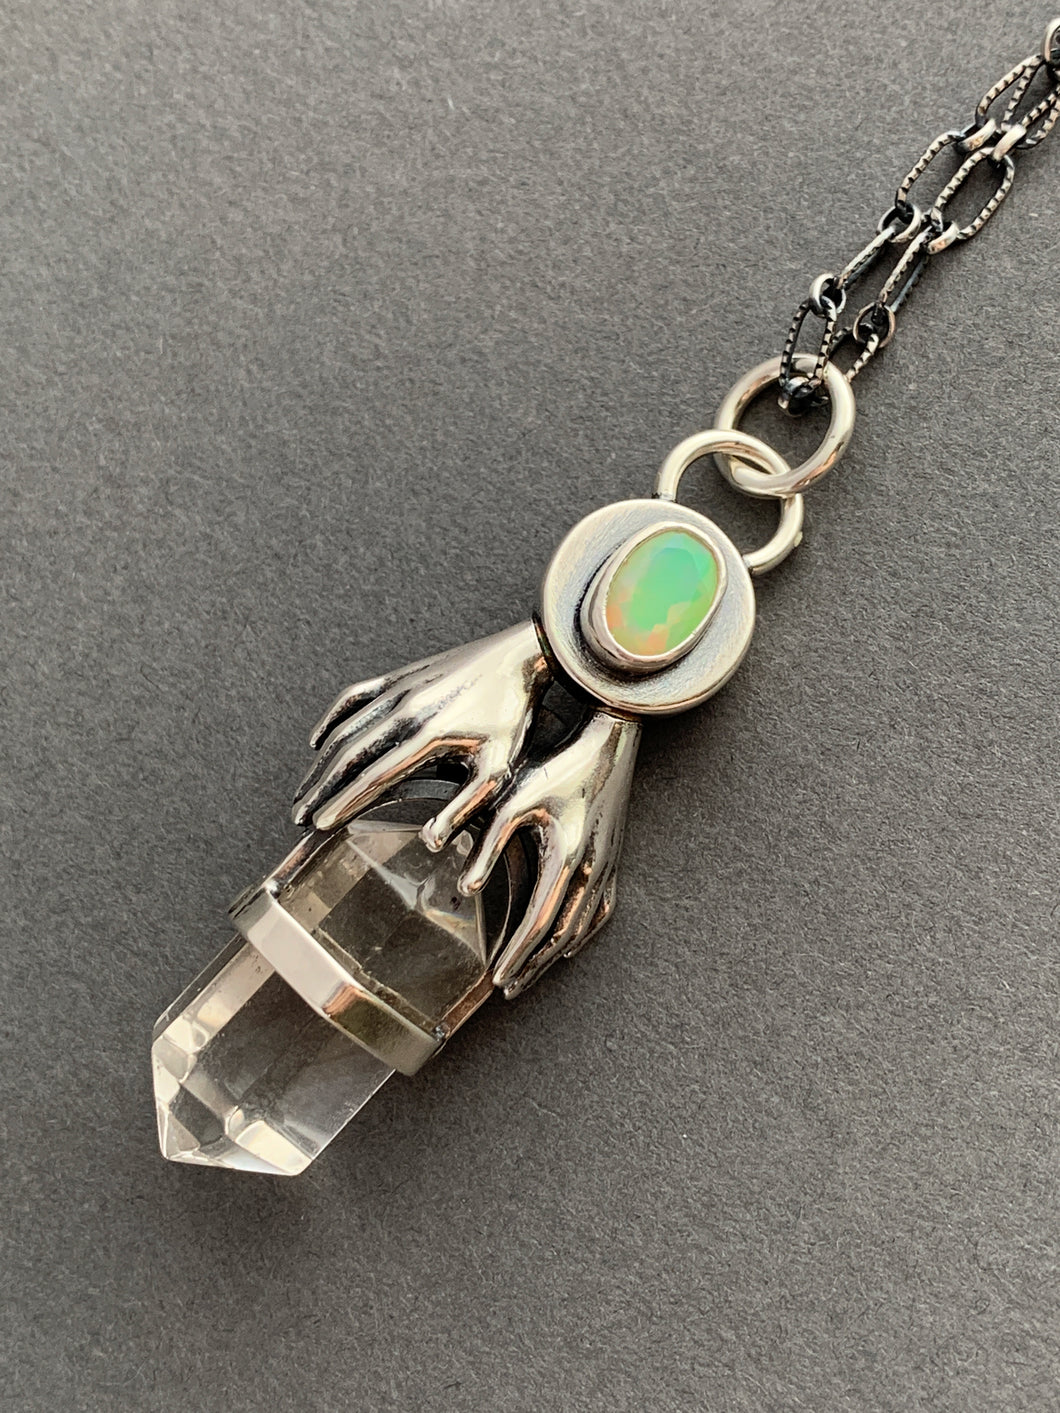 Opal and quartz crystal necklace